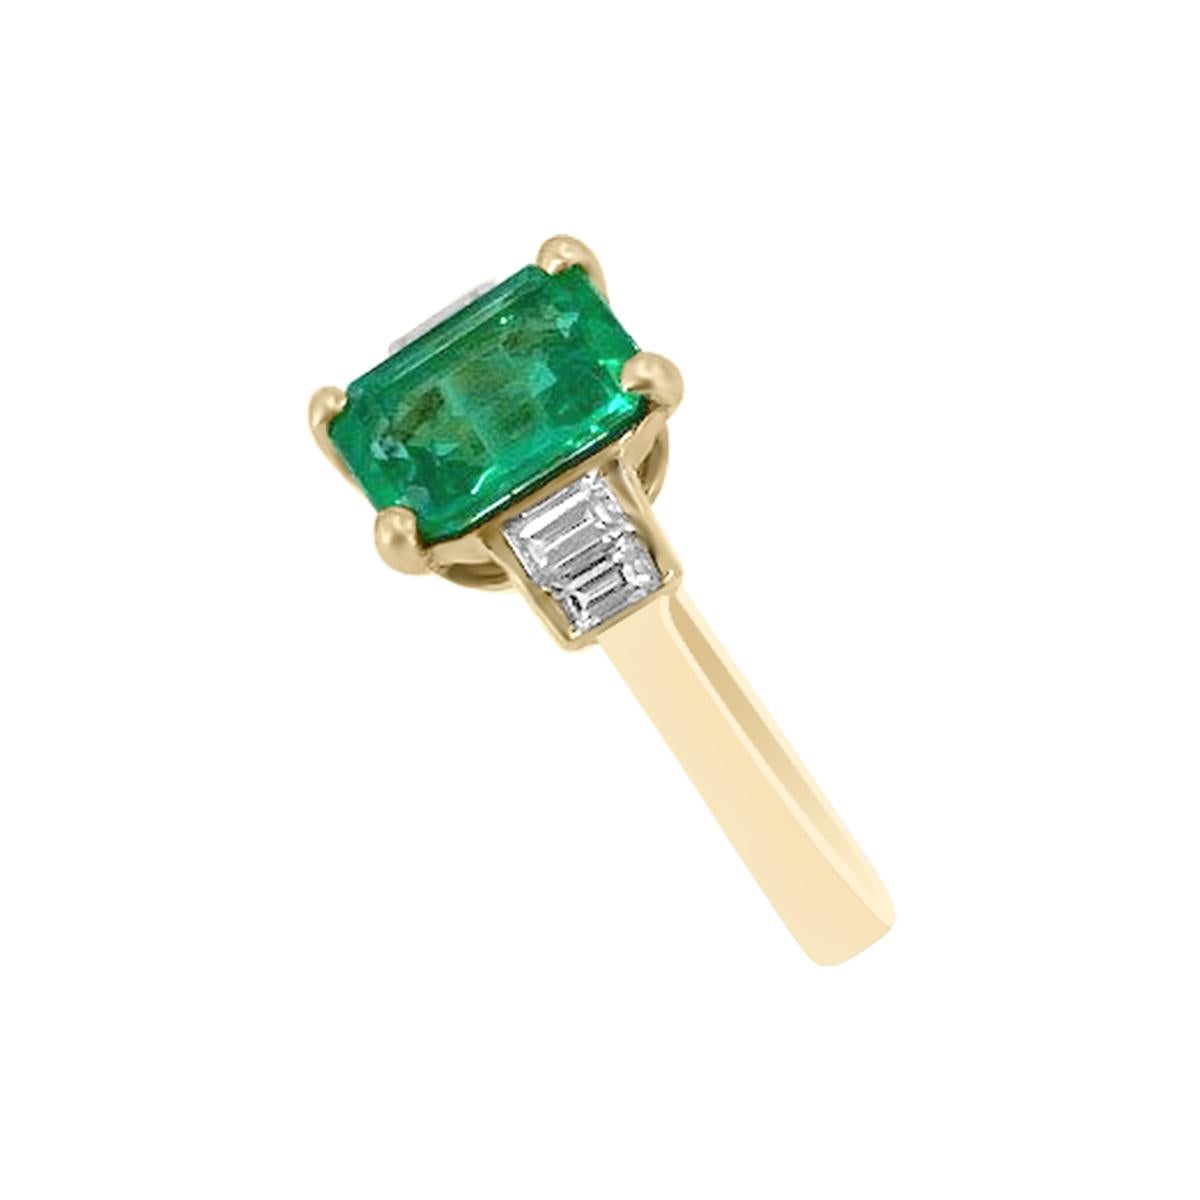 Modern 18K Yellow Gold 1.13cts Emerald and Diamond Ring, Style# R1538